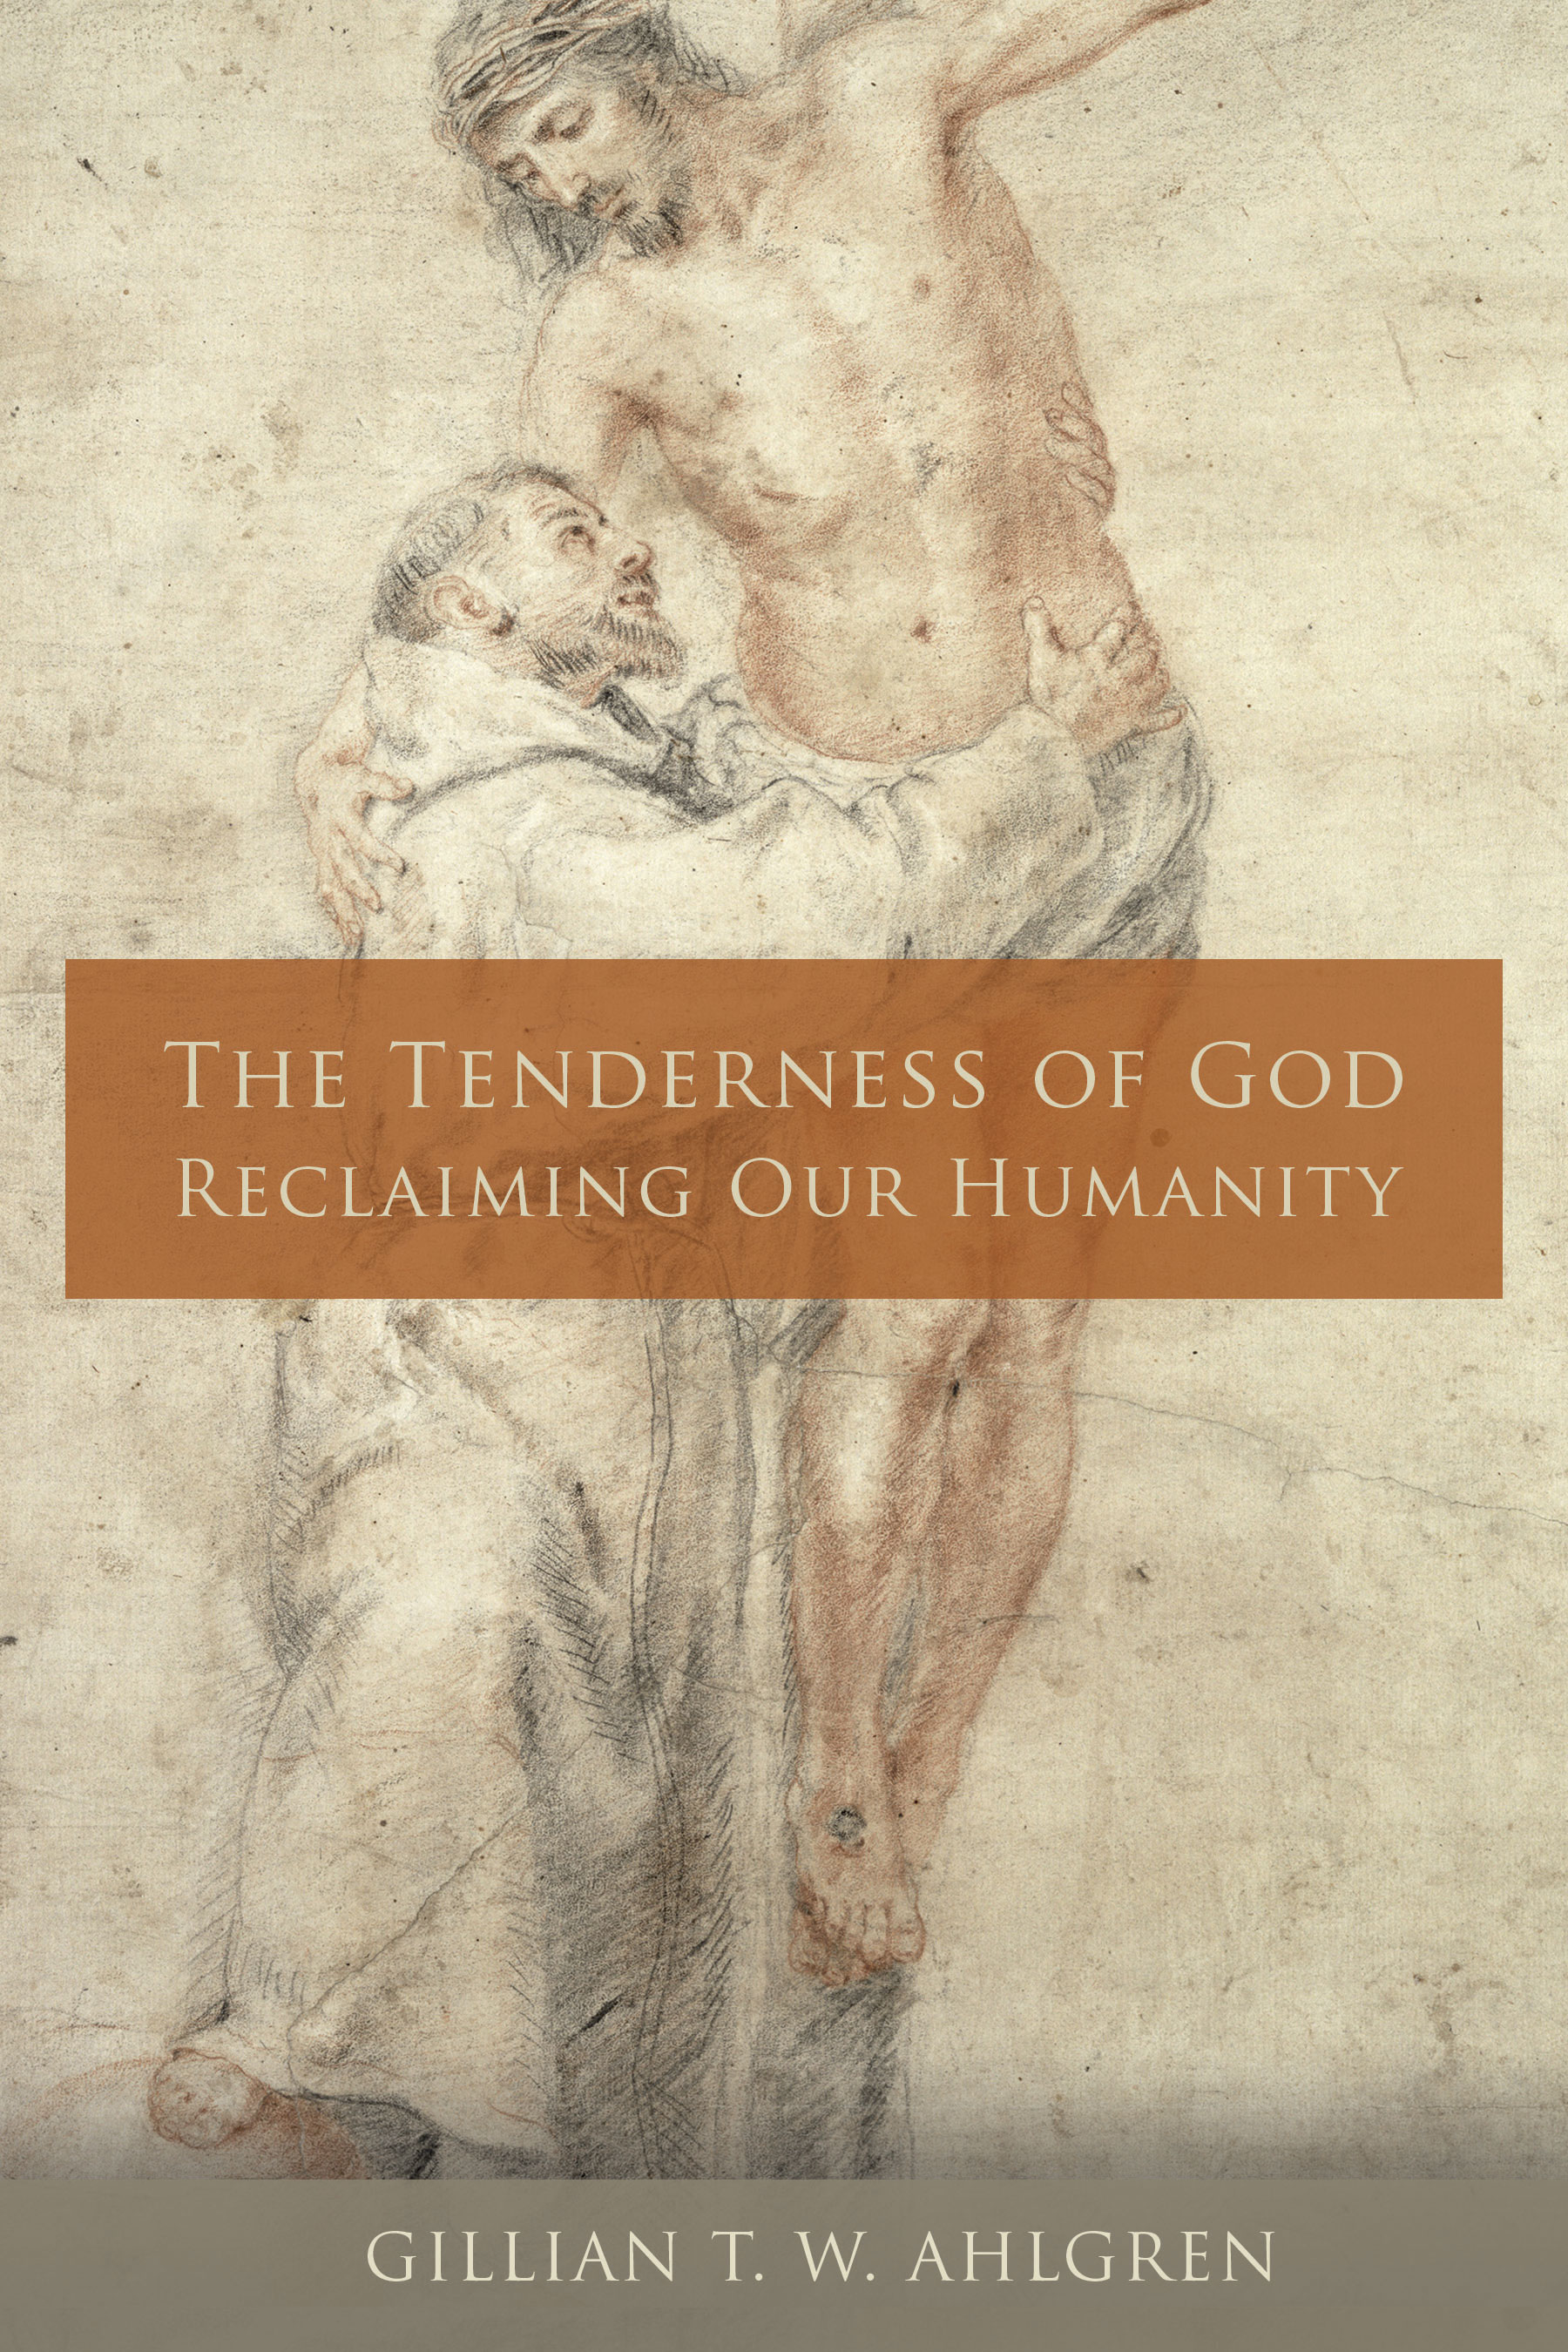 The Tenderness of God: Reclaiming Our Humanity